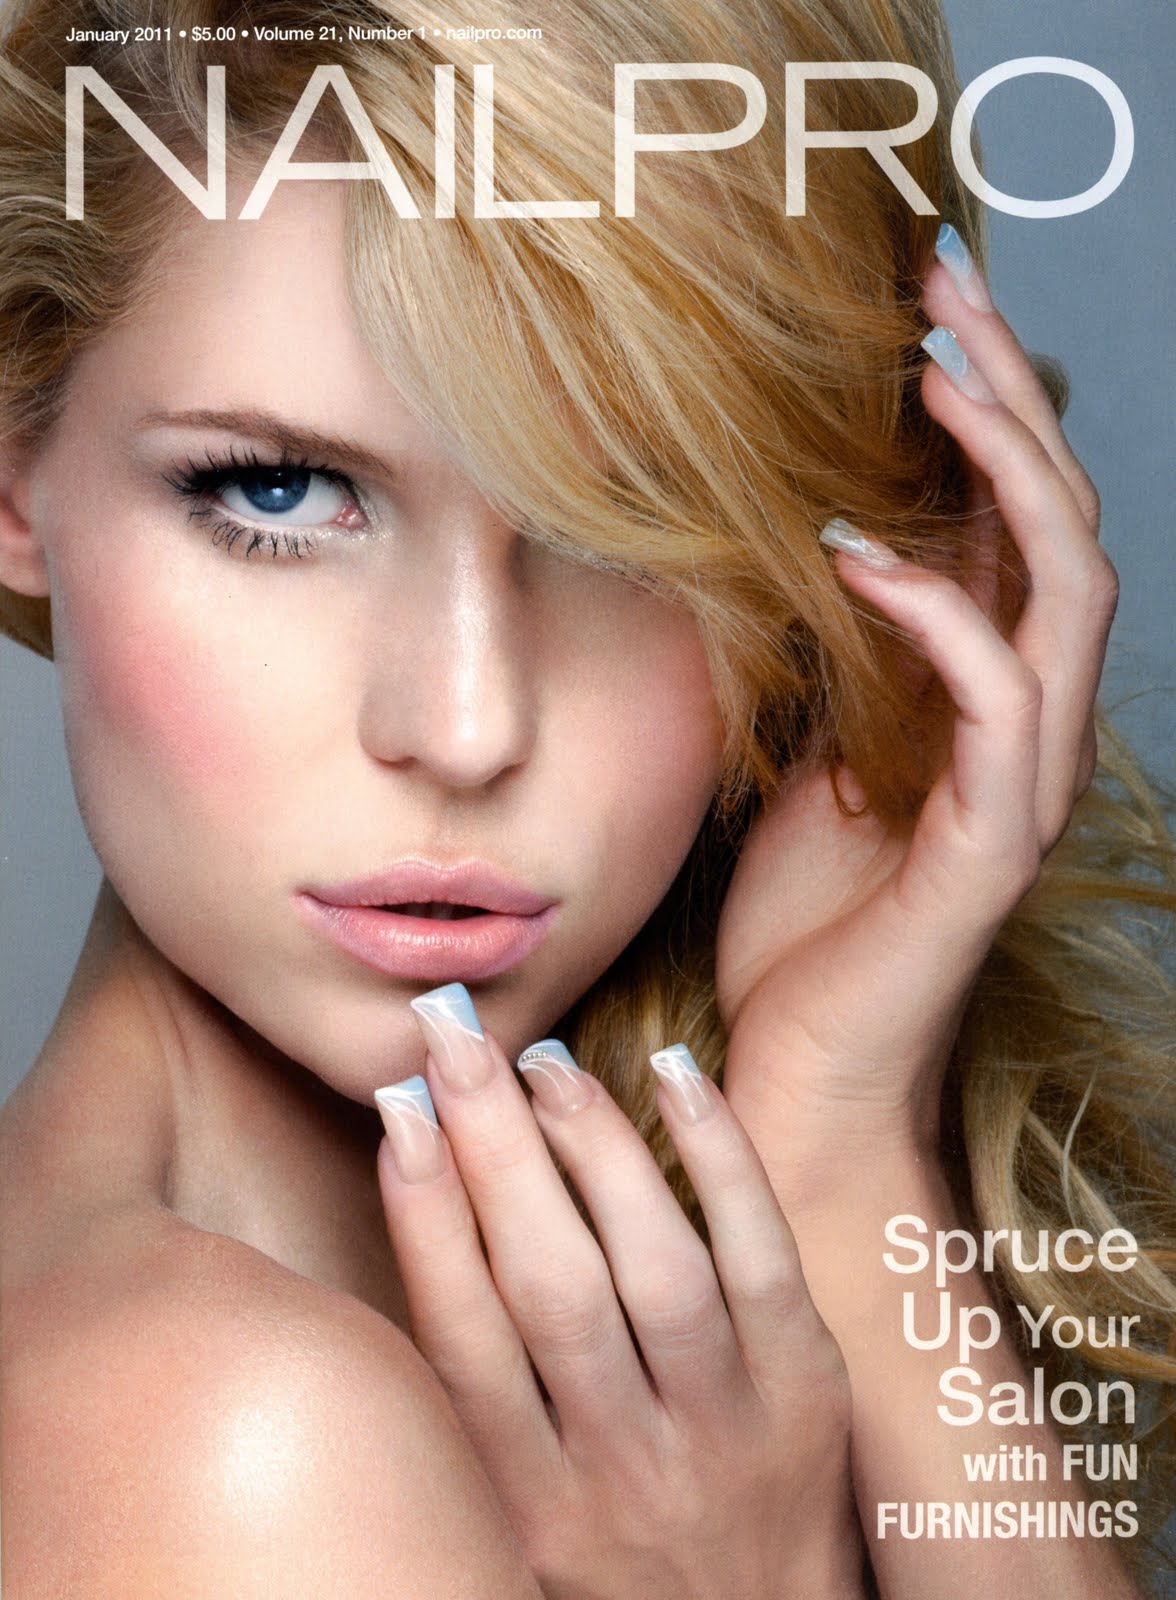 My first cover of the year is shot for Nail Pro Magazine, a new client whom